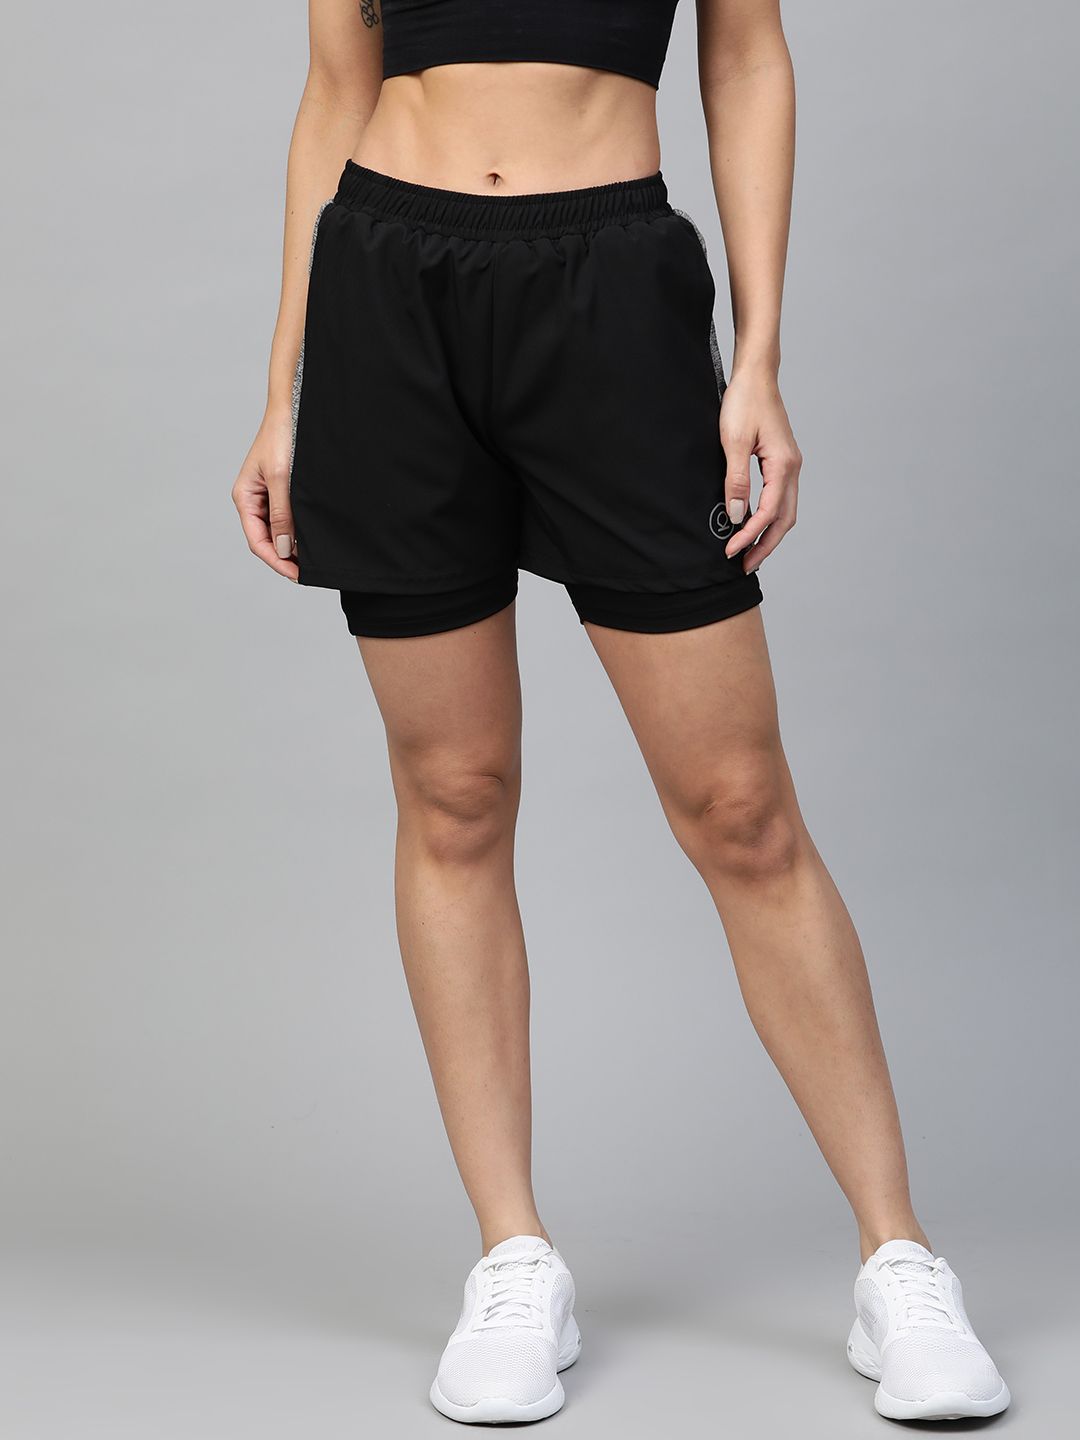 Chkokko Women Black Side Panelled Regular Fit Double Layered Running Shorts Price in India